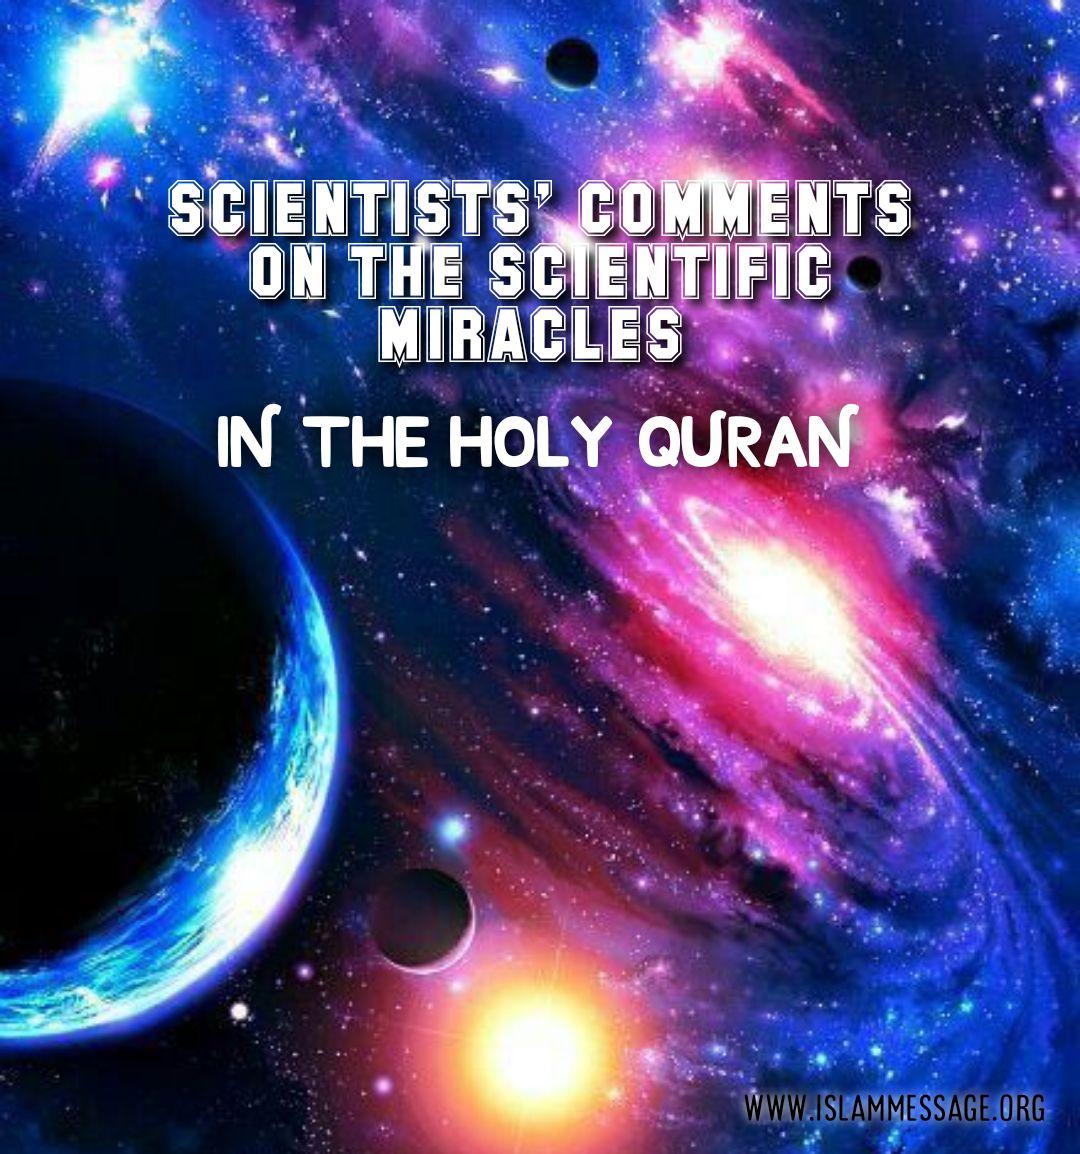 SCIENTISTS’ COMMENTS ON THE SCIENTIFIC MIRACLES IN THE HOLY QURAN